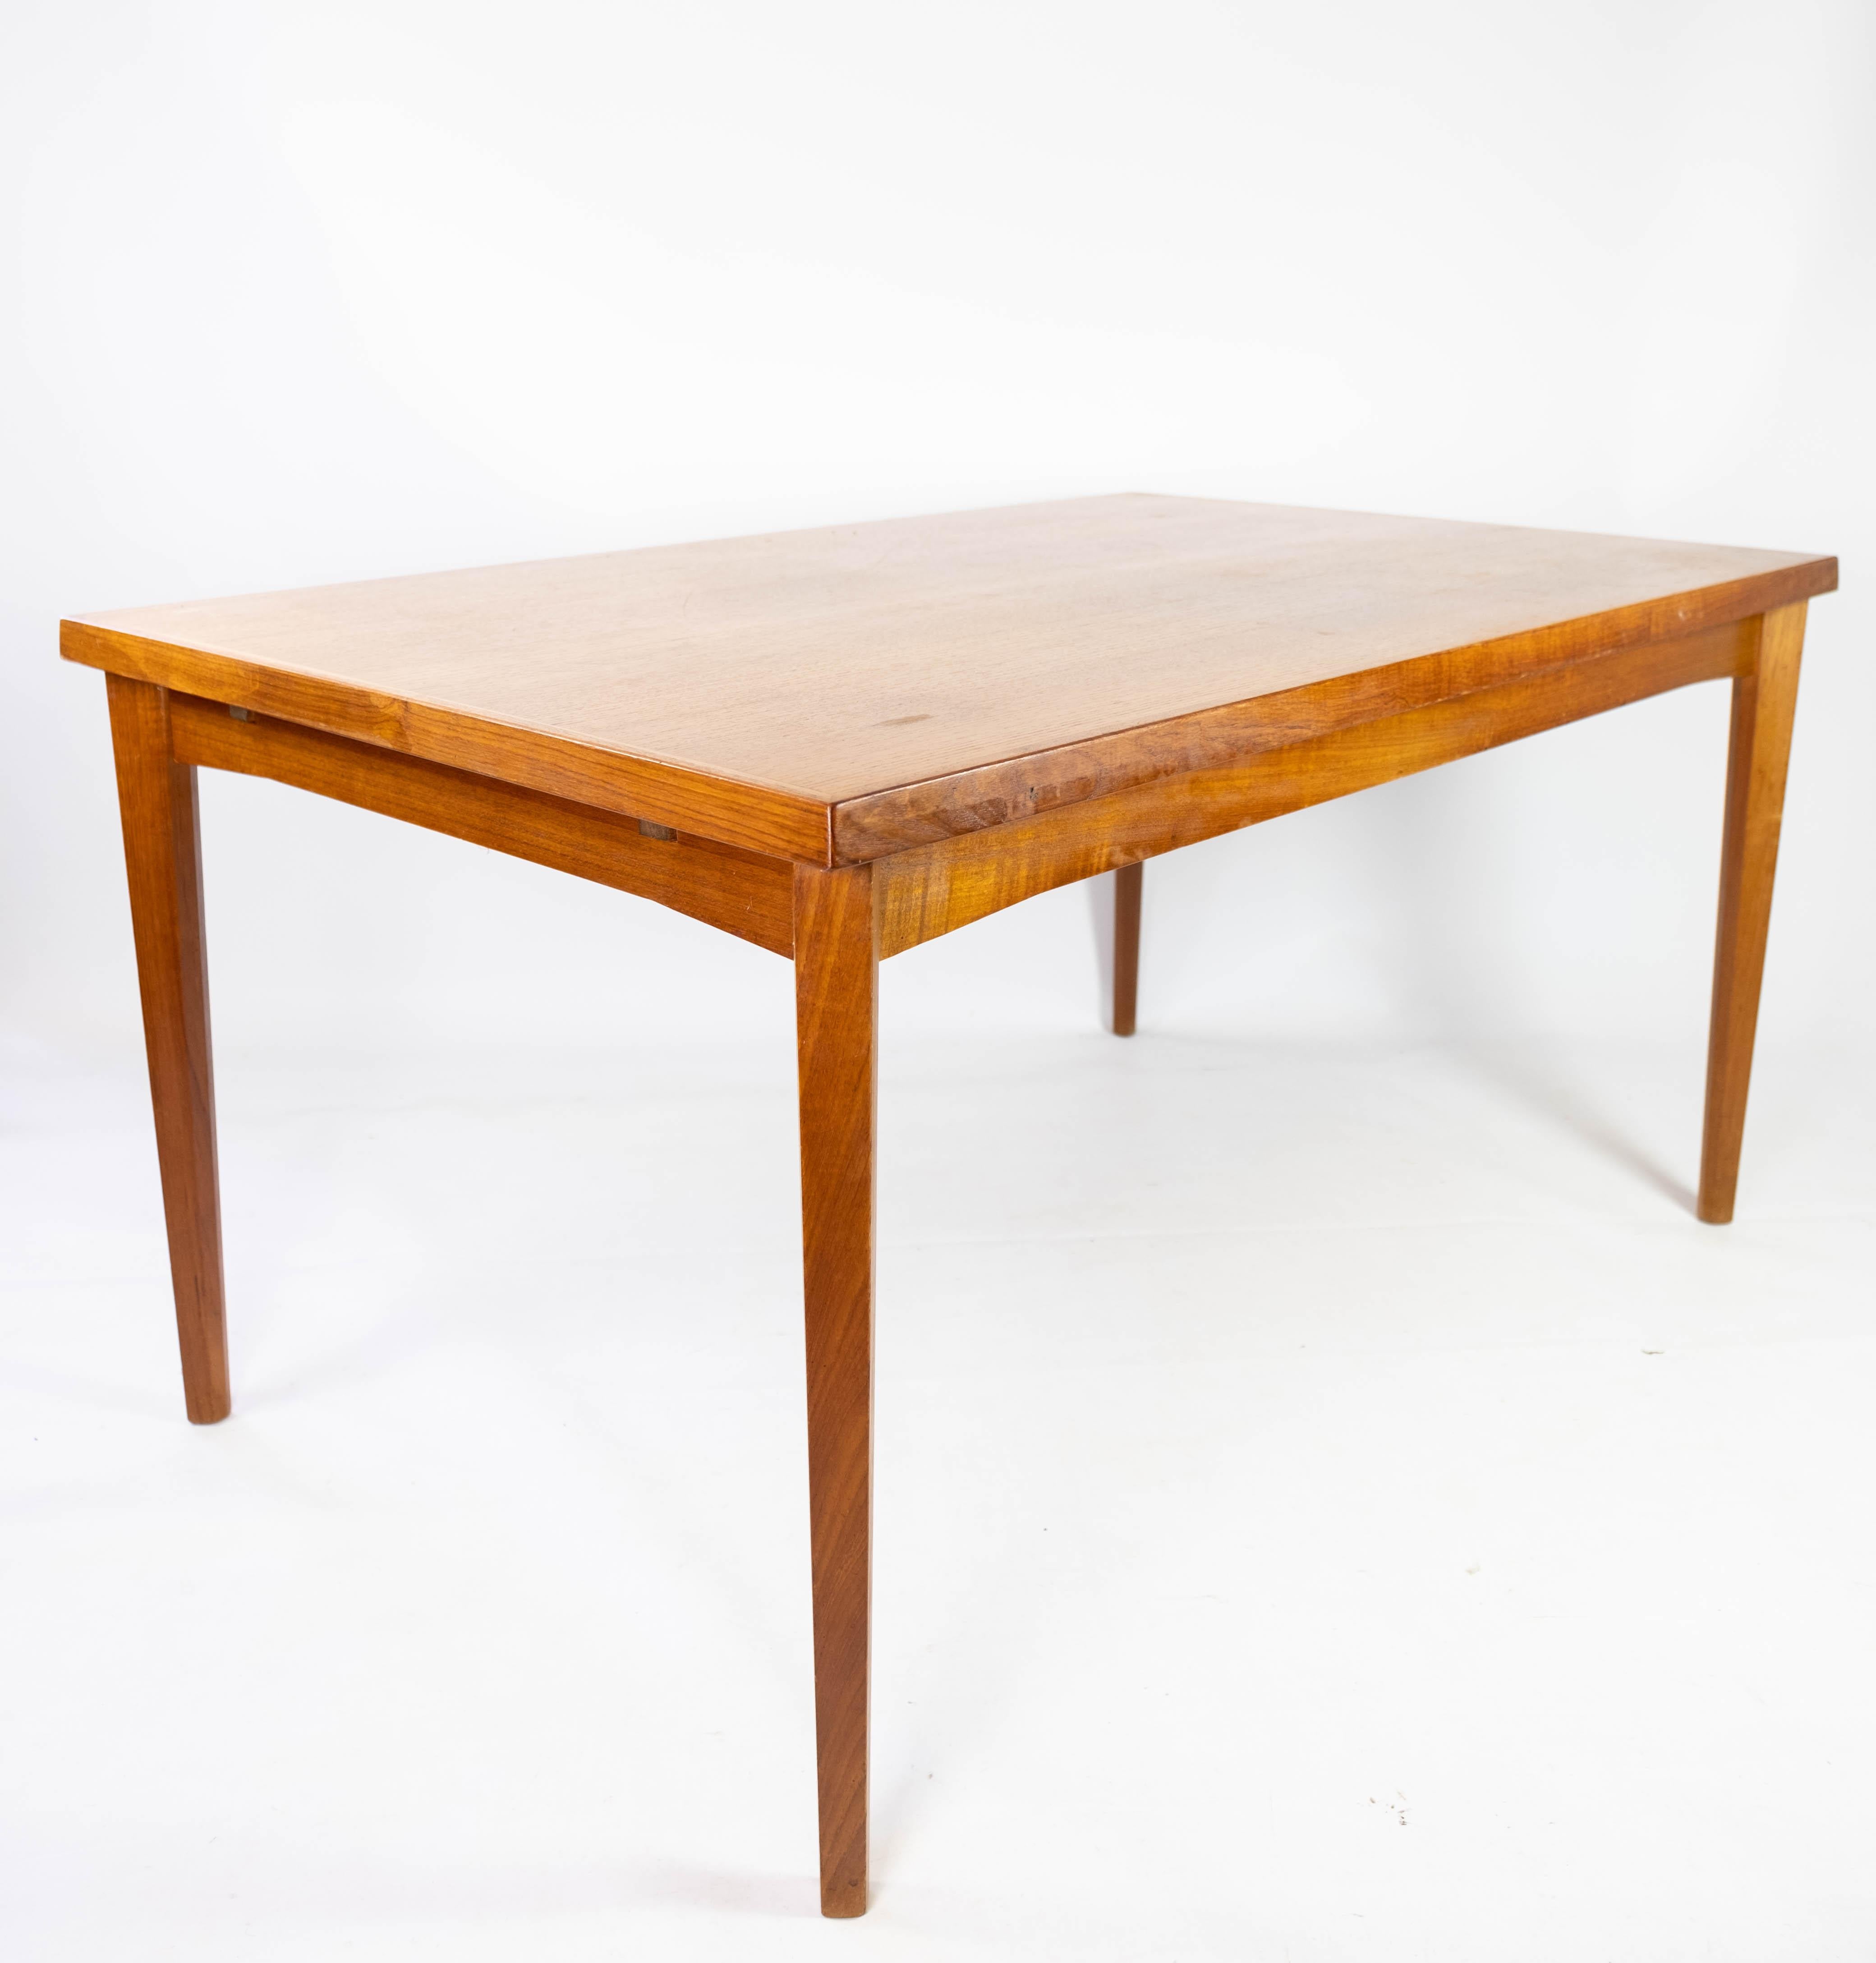 Mid-20th Century Dining Table With Extensions Made In Teak, Danish Design From 1960s For Sale